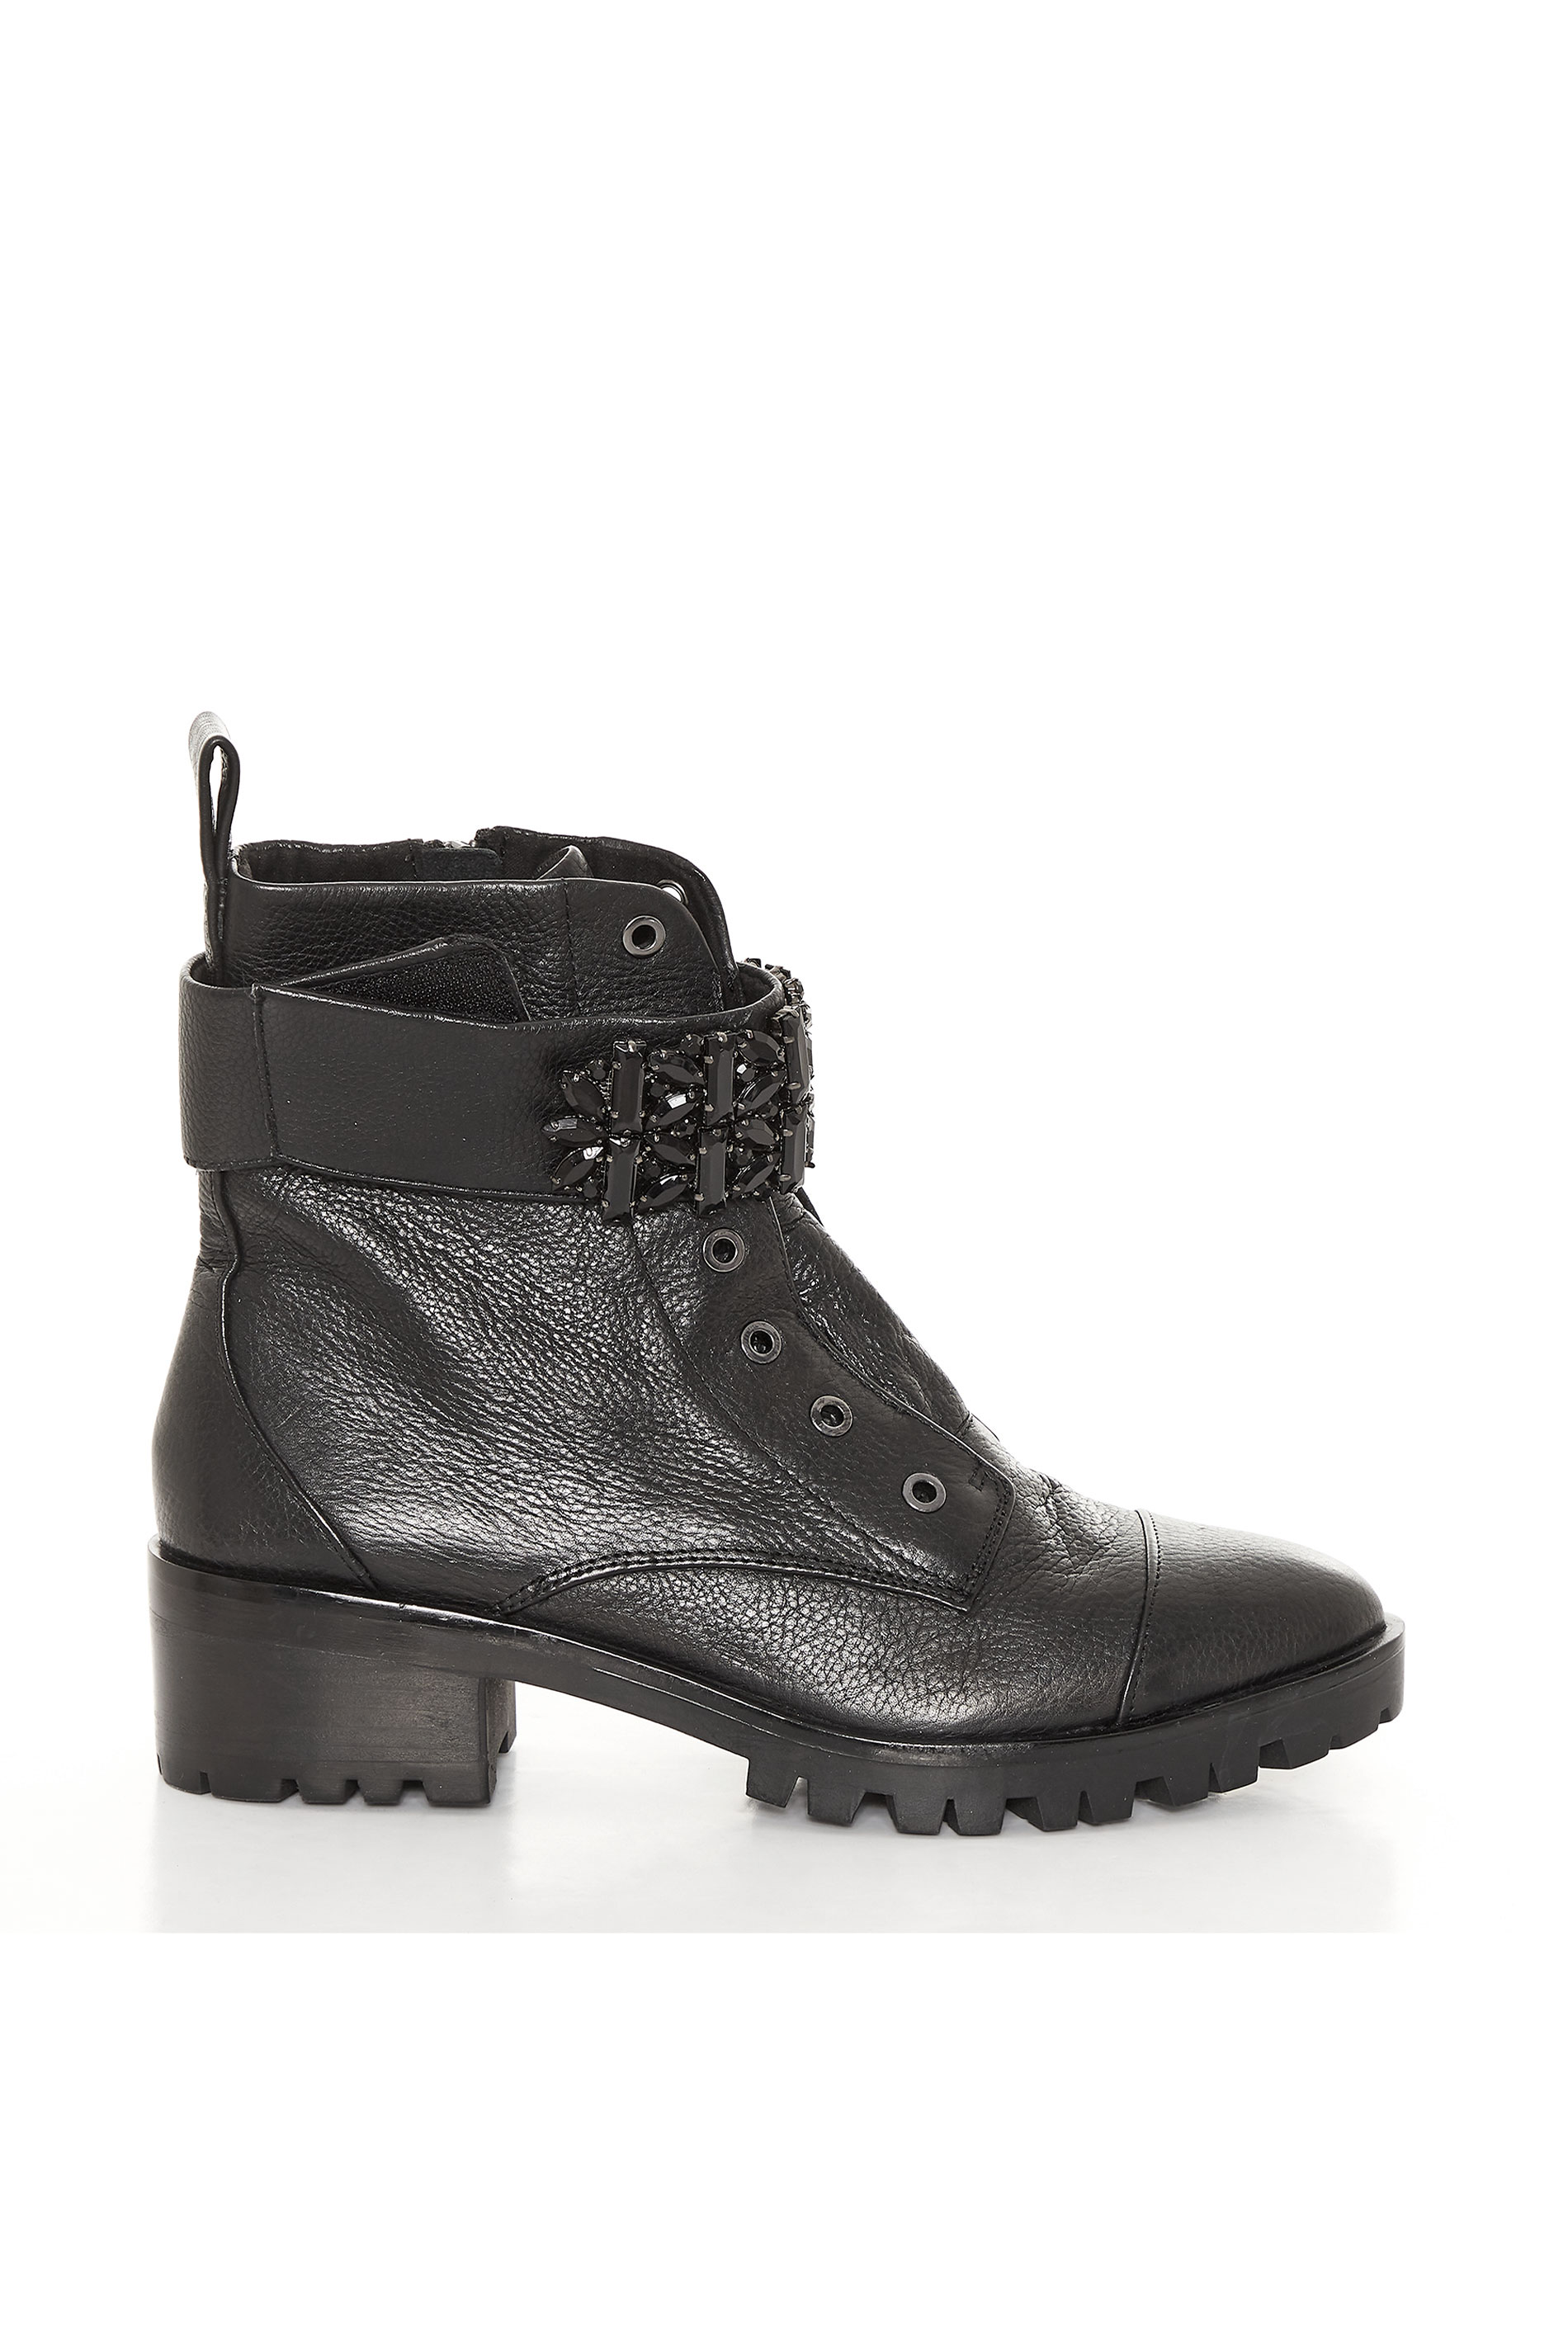 KARL LAGERFELD PARIS Black Embellished Boots | Long Tall Sally